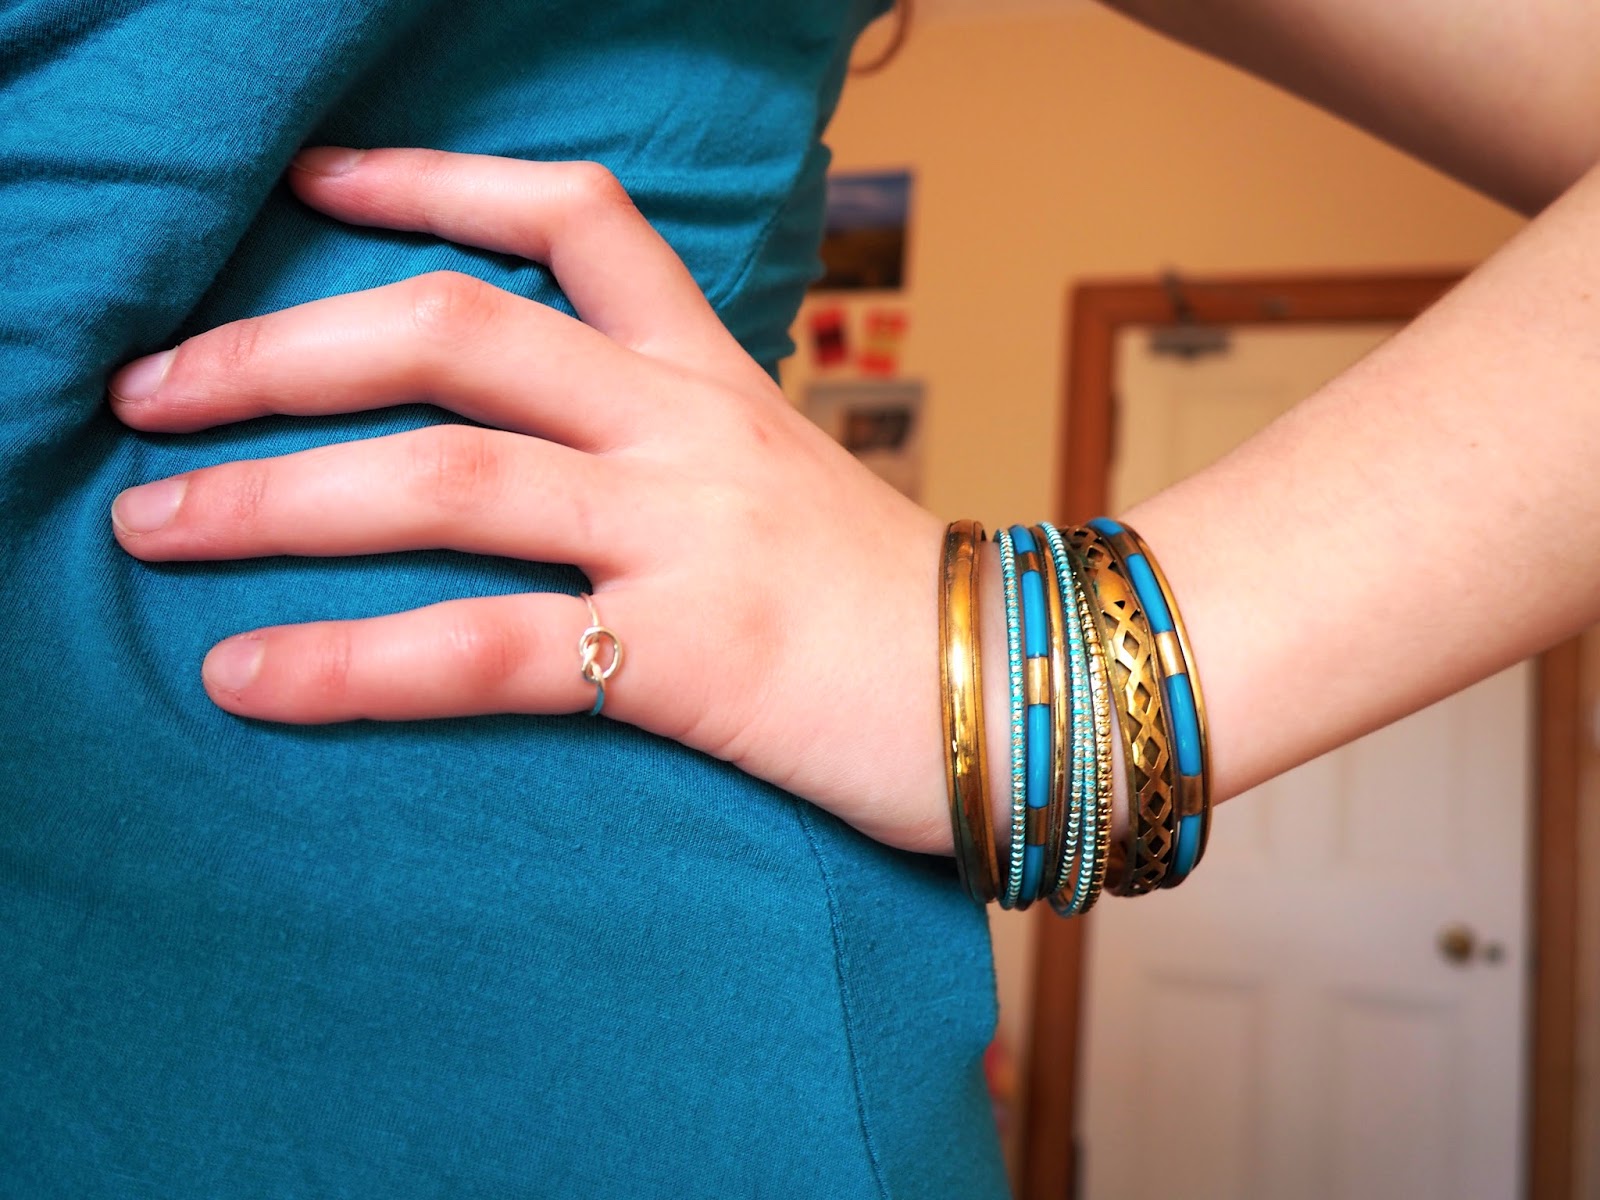 Blue Jeans outfit jewellery details - blue and gold bangles, silver knot ring